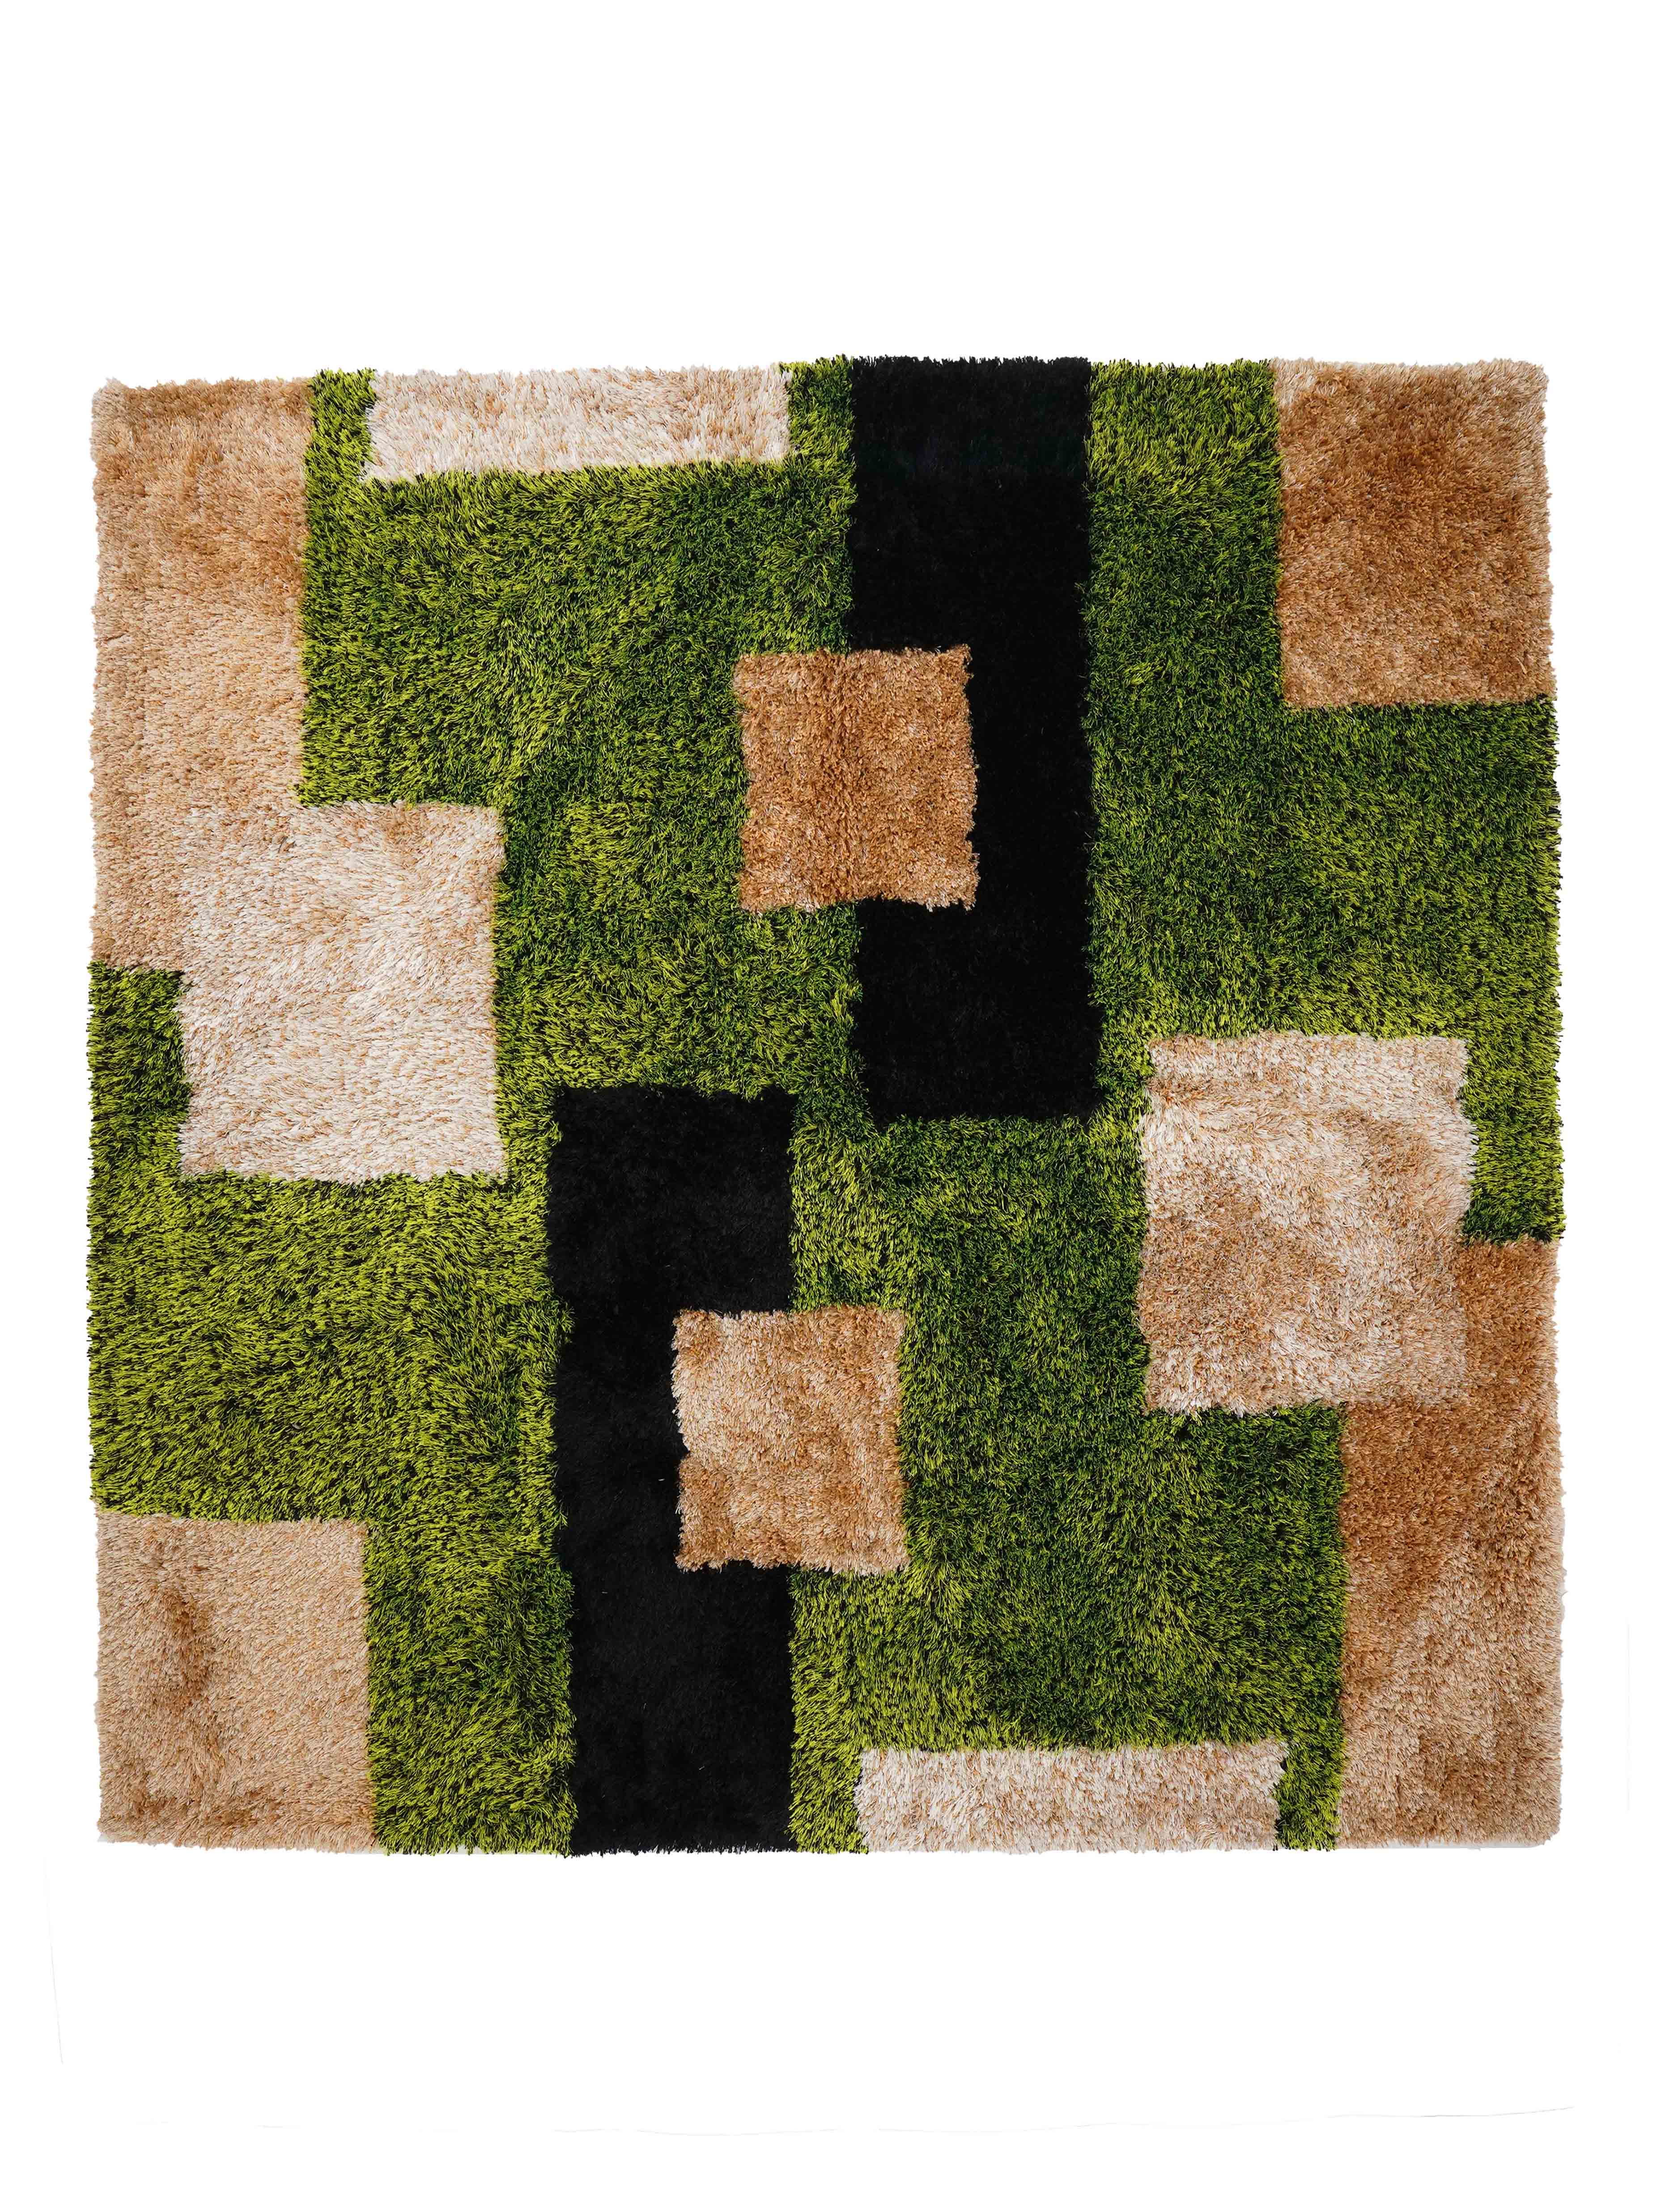 Hand Tufted Shag Polyester Square Area Rug Geometric Green Beige K00012